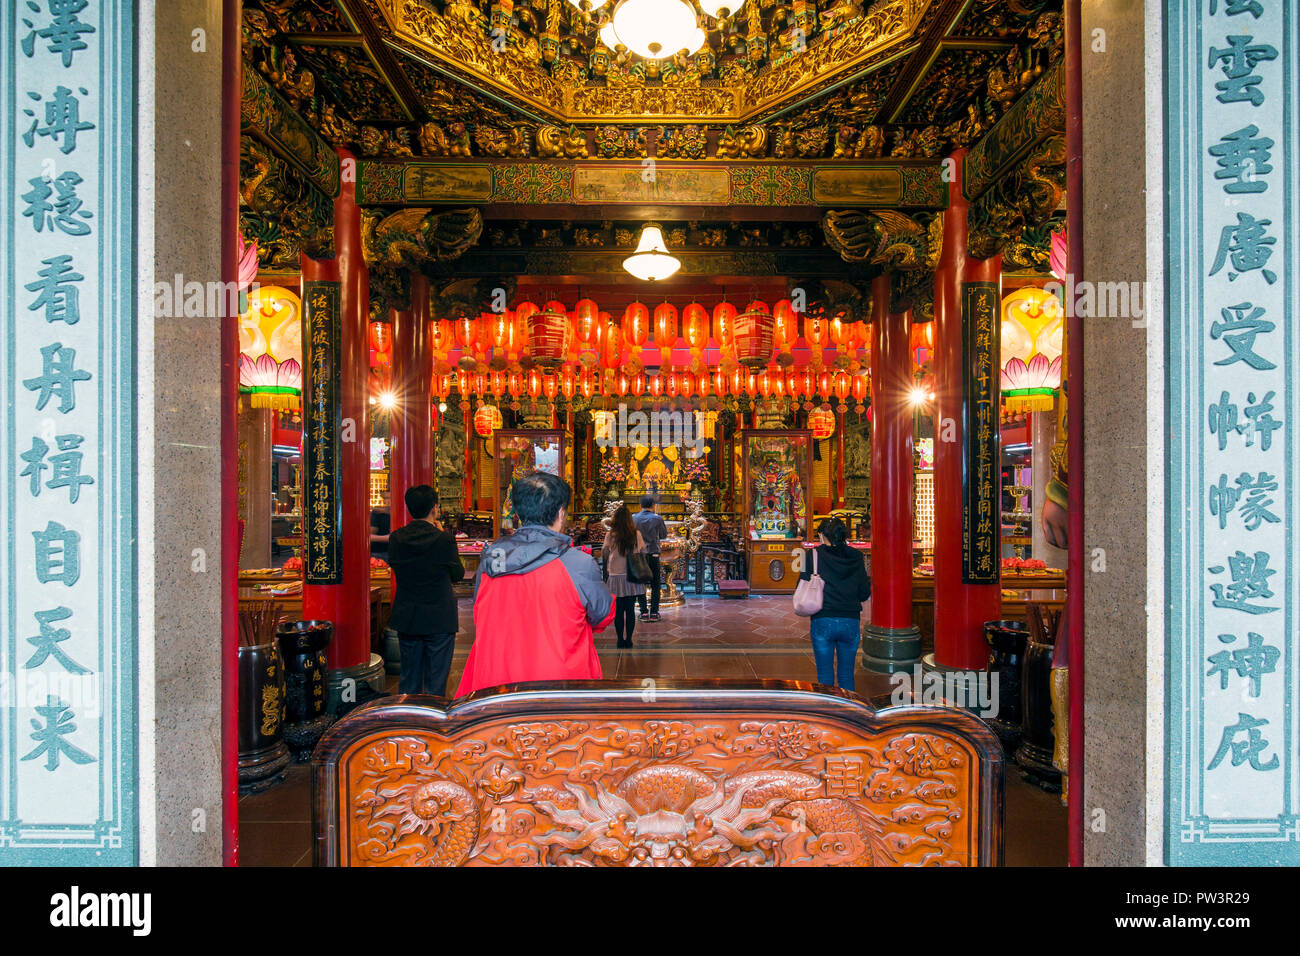 Taiwan, Taipei, Songshan District, Temple Ciyou Banque D'Images